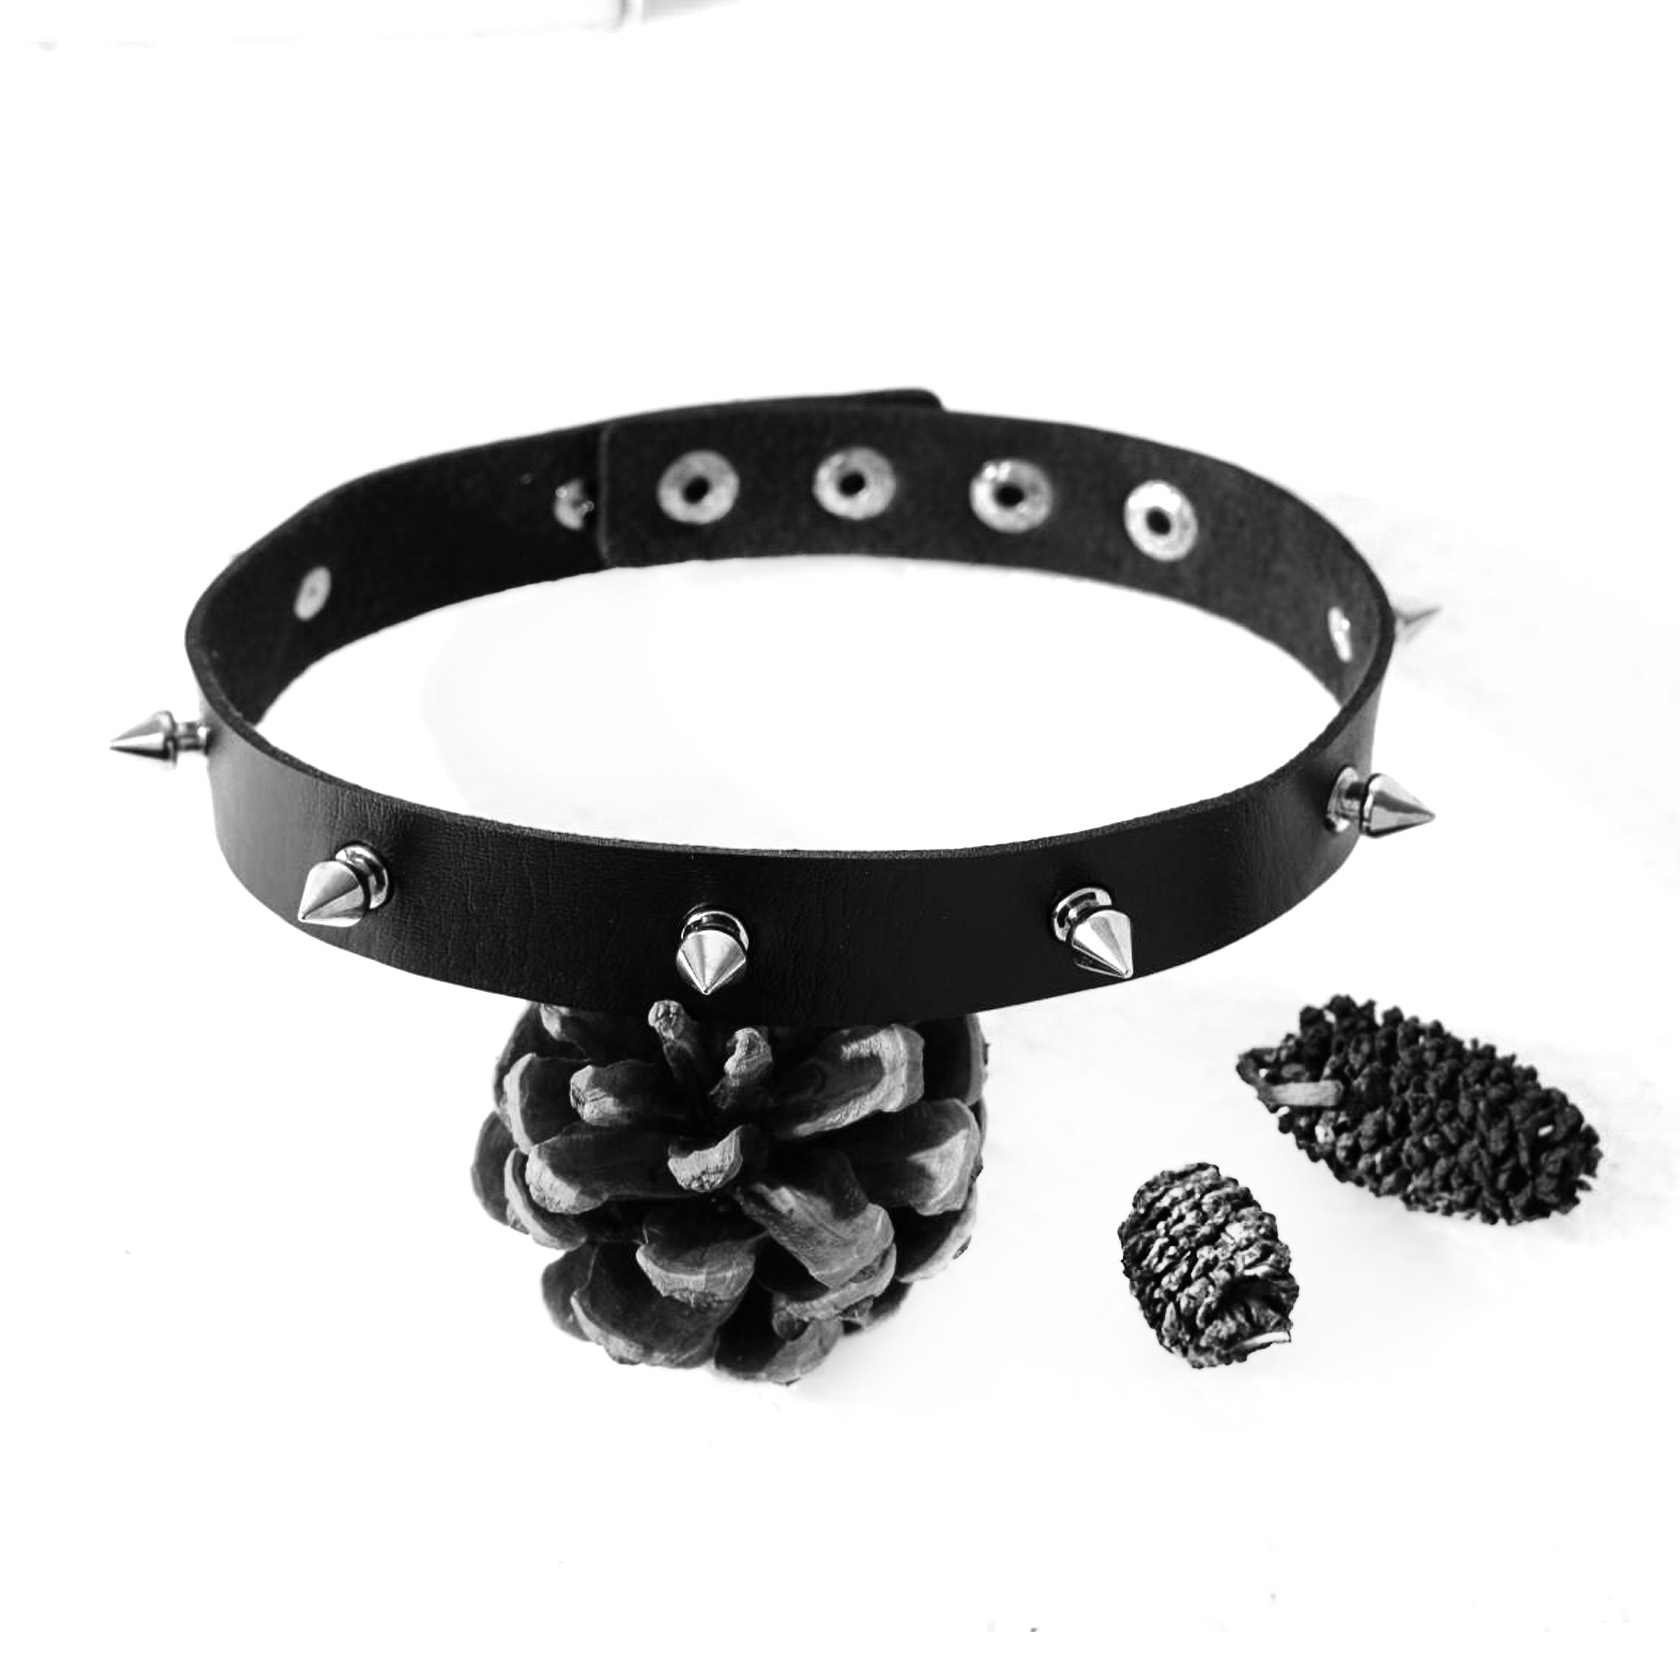 Punk faux leather choker studded collar with rock O-ring adjustable necklace 